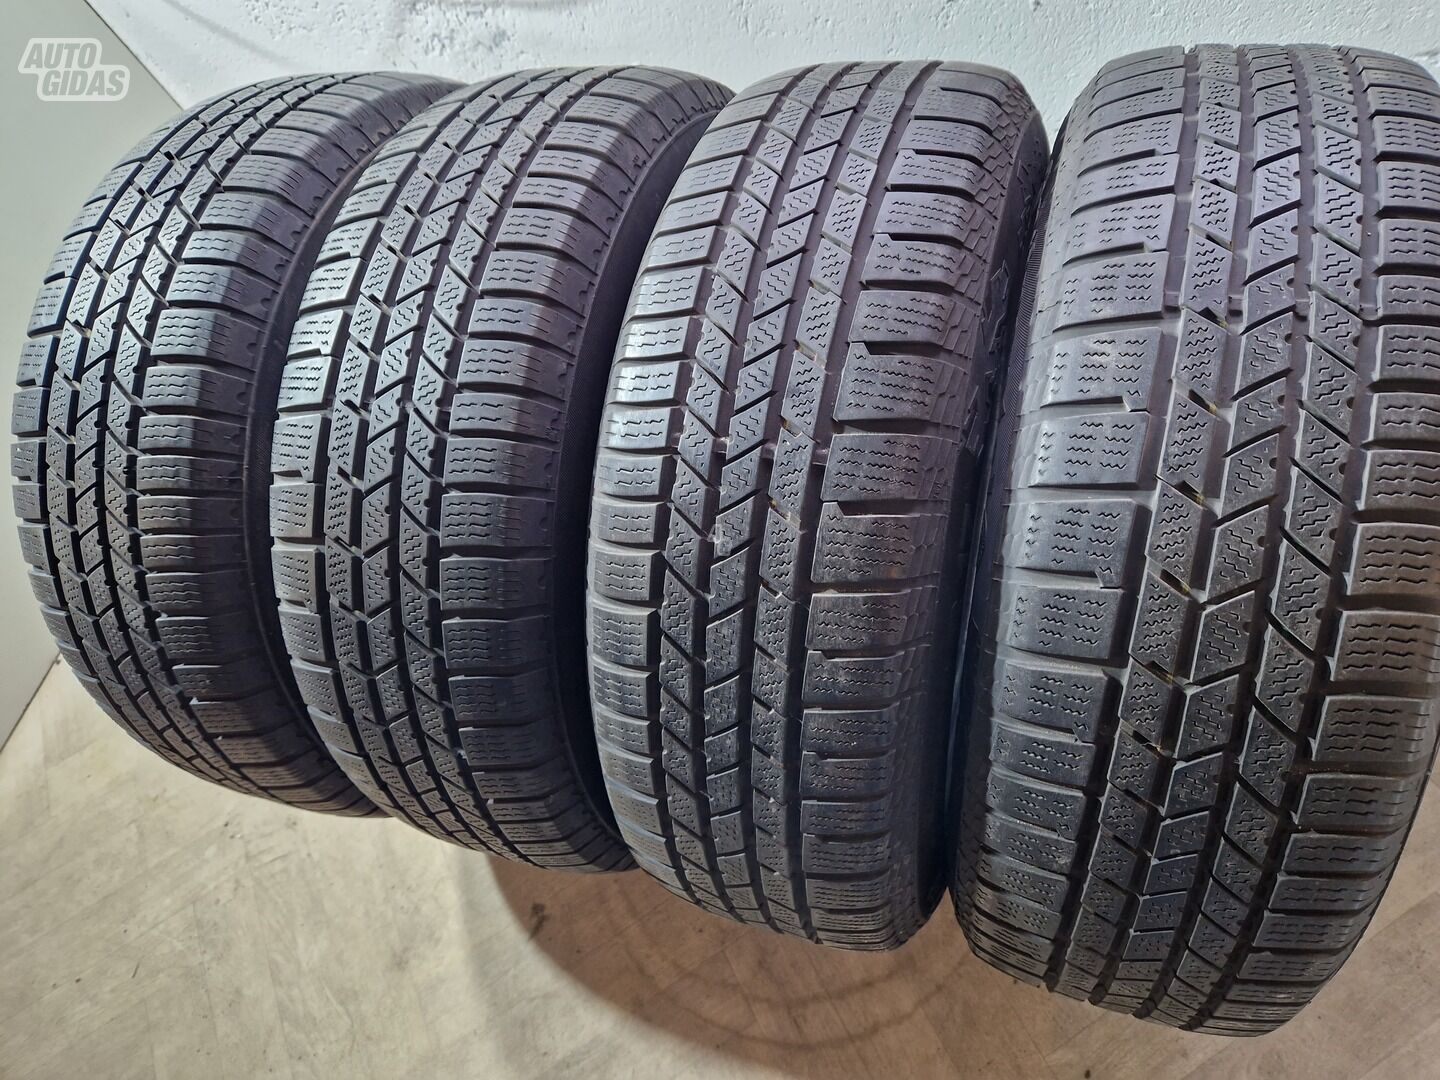 Continental 5-6mm R17 universal tyres passanger car